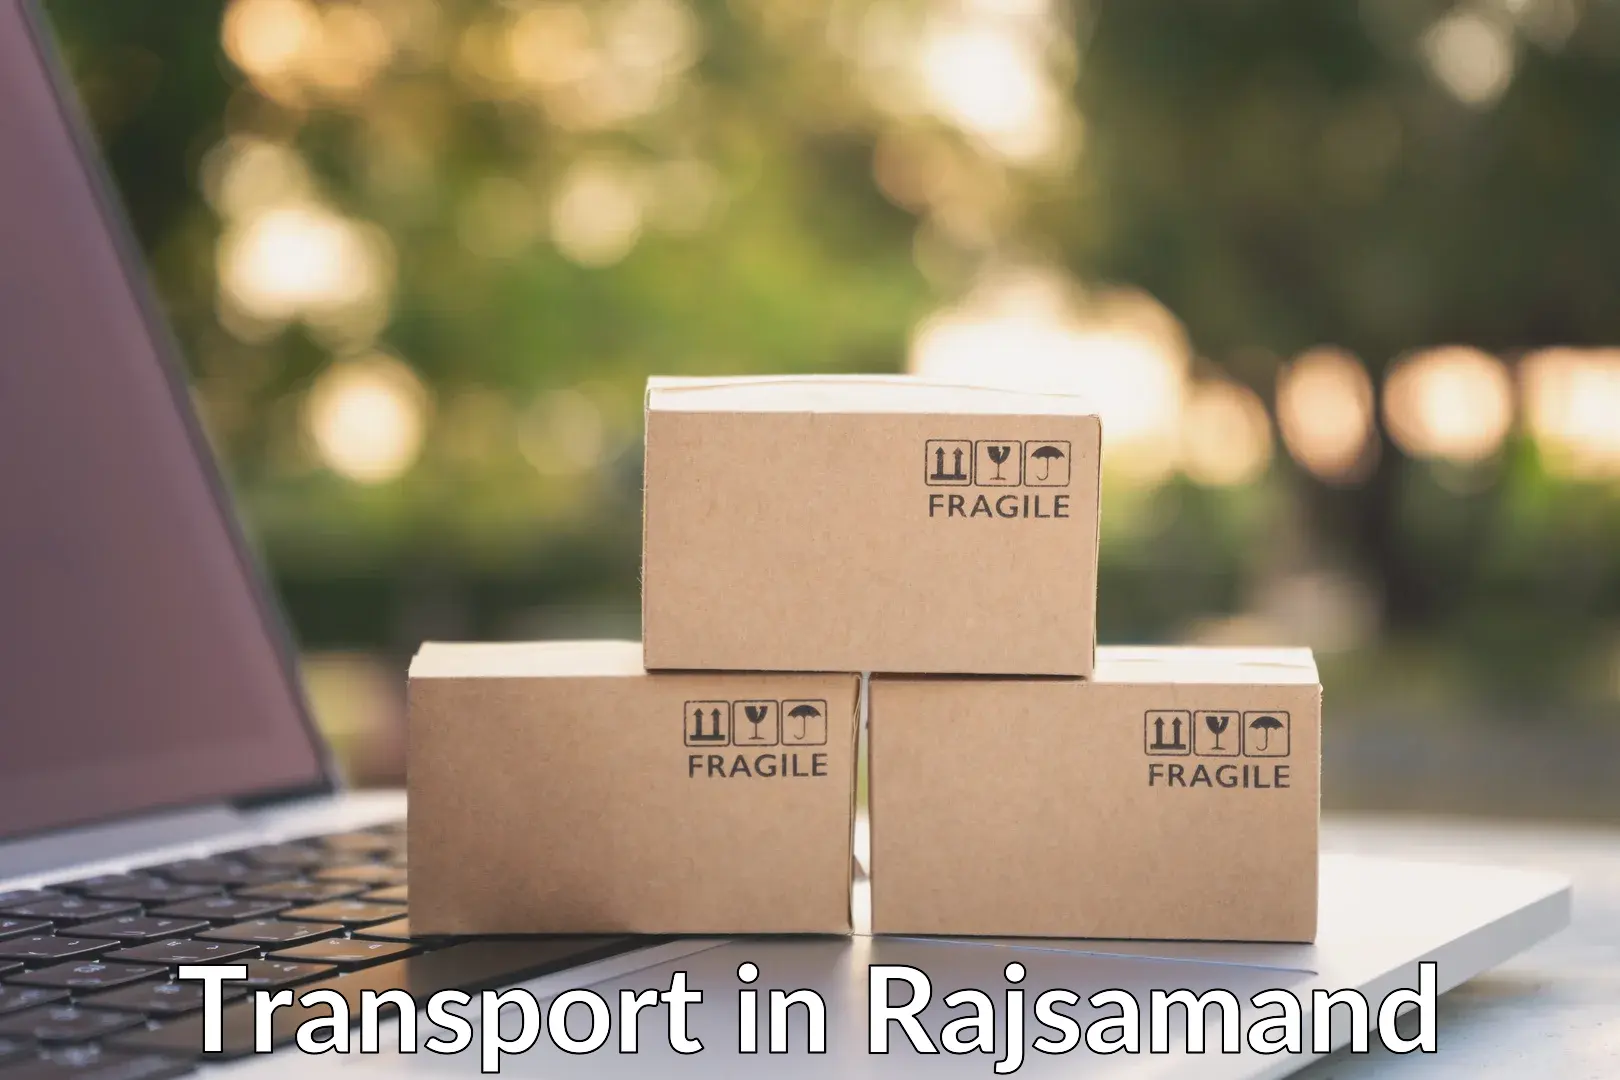 Container transport service in Rajsamand